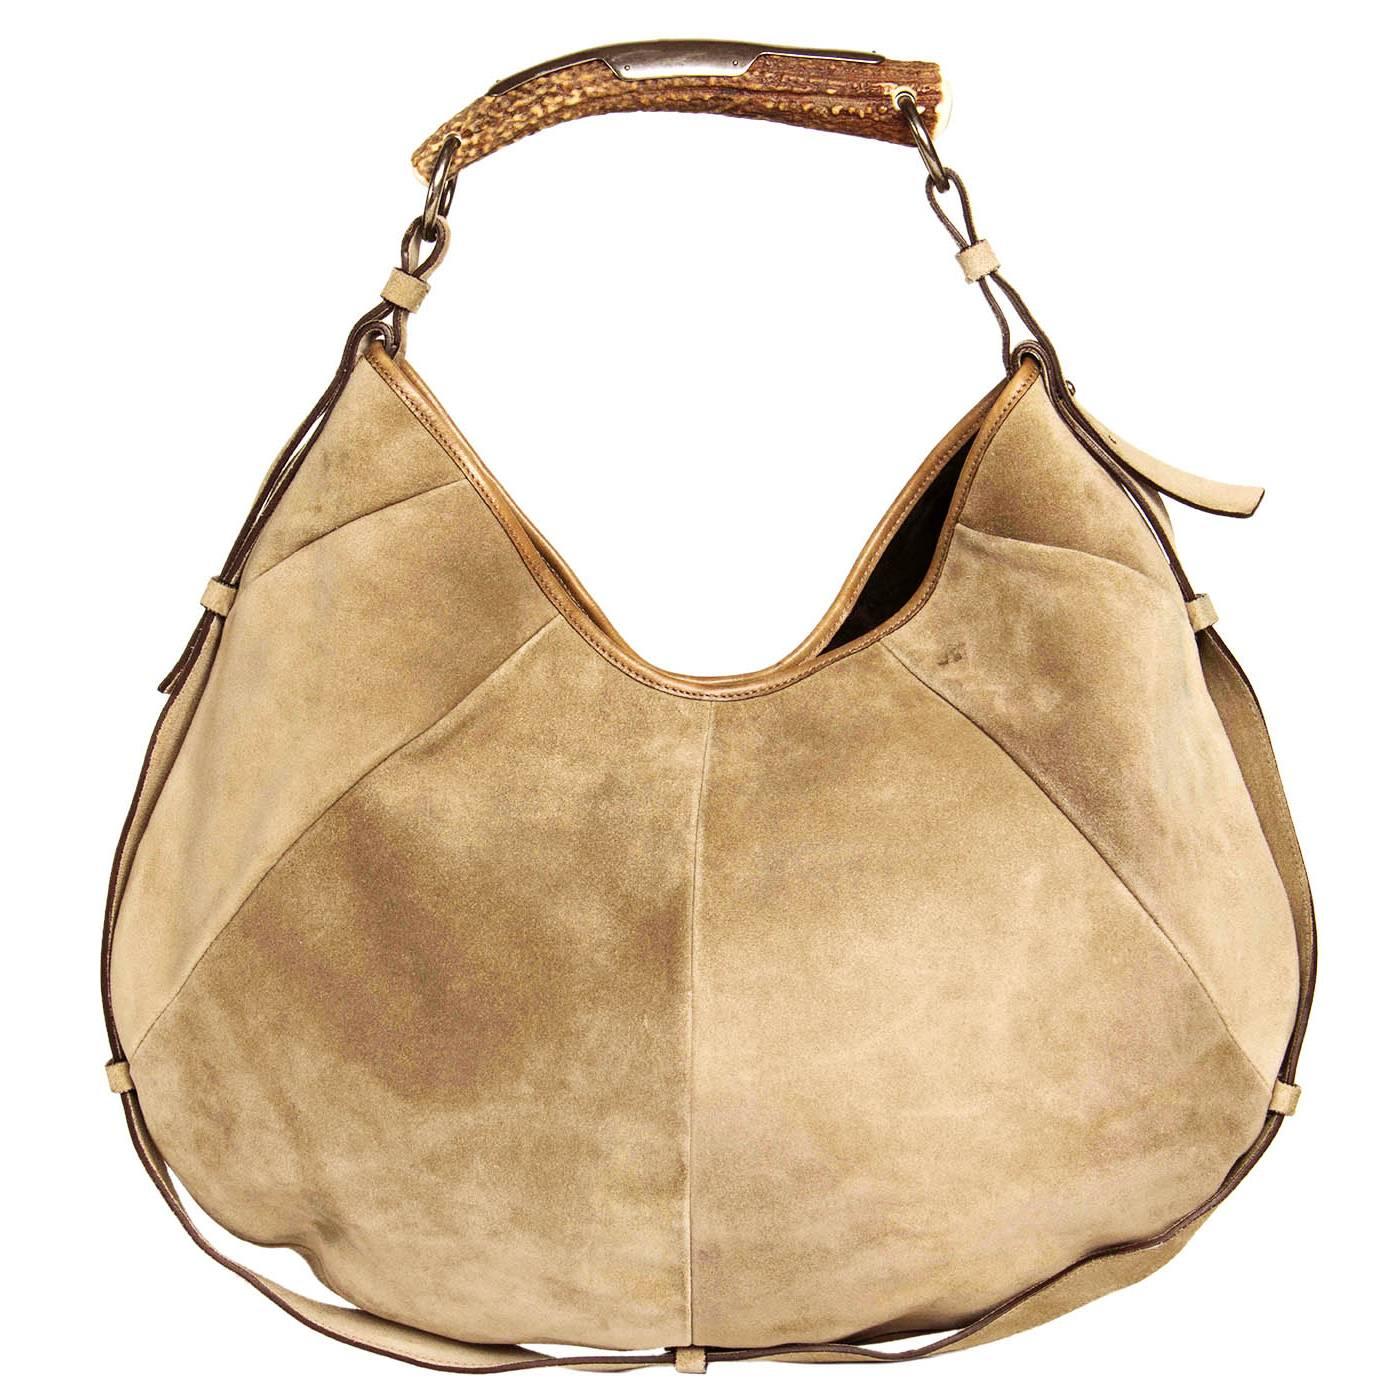 Yves Saint Laurent Iconic Taupe Suede Medium Hobo Bag with Horn Handle For Sale